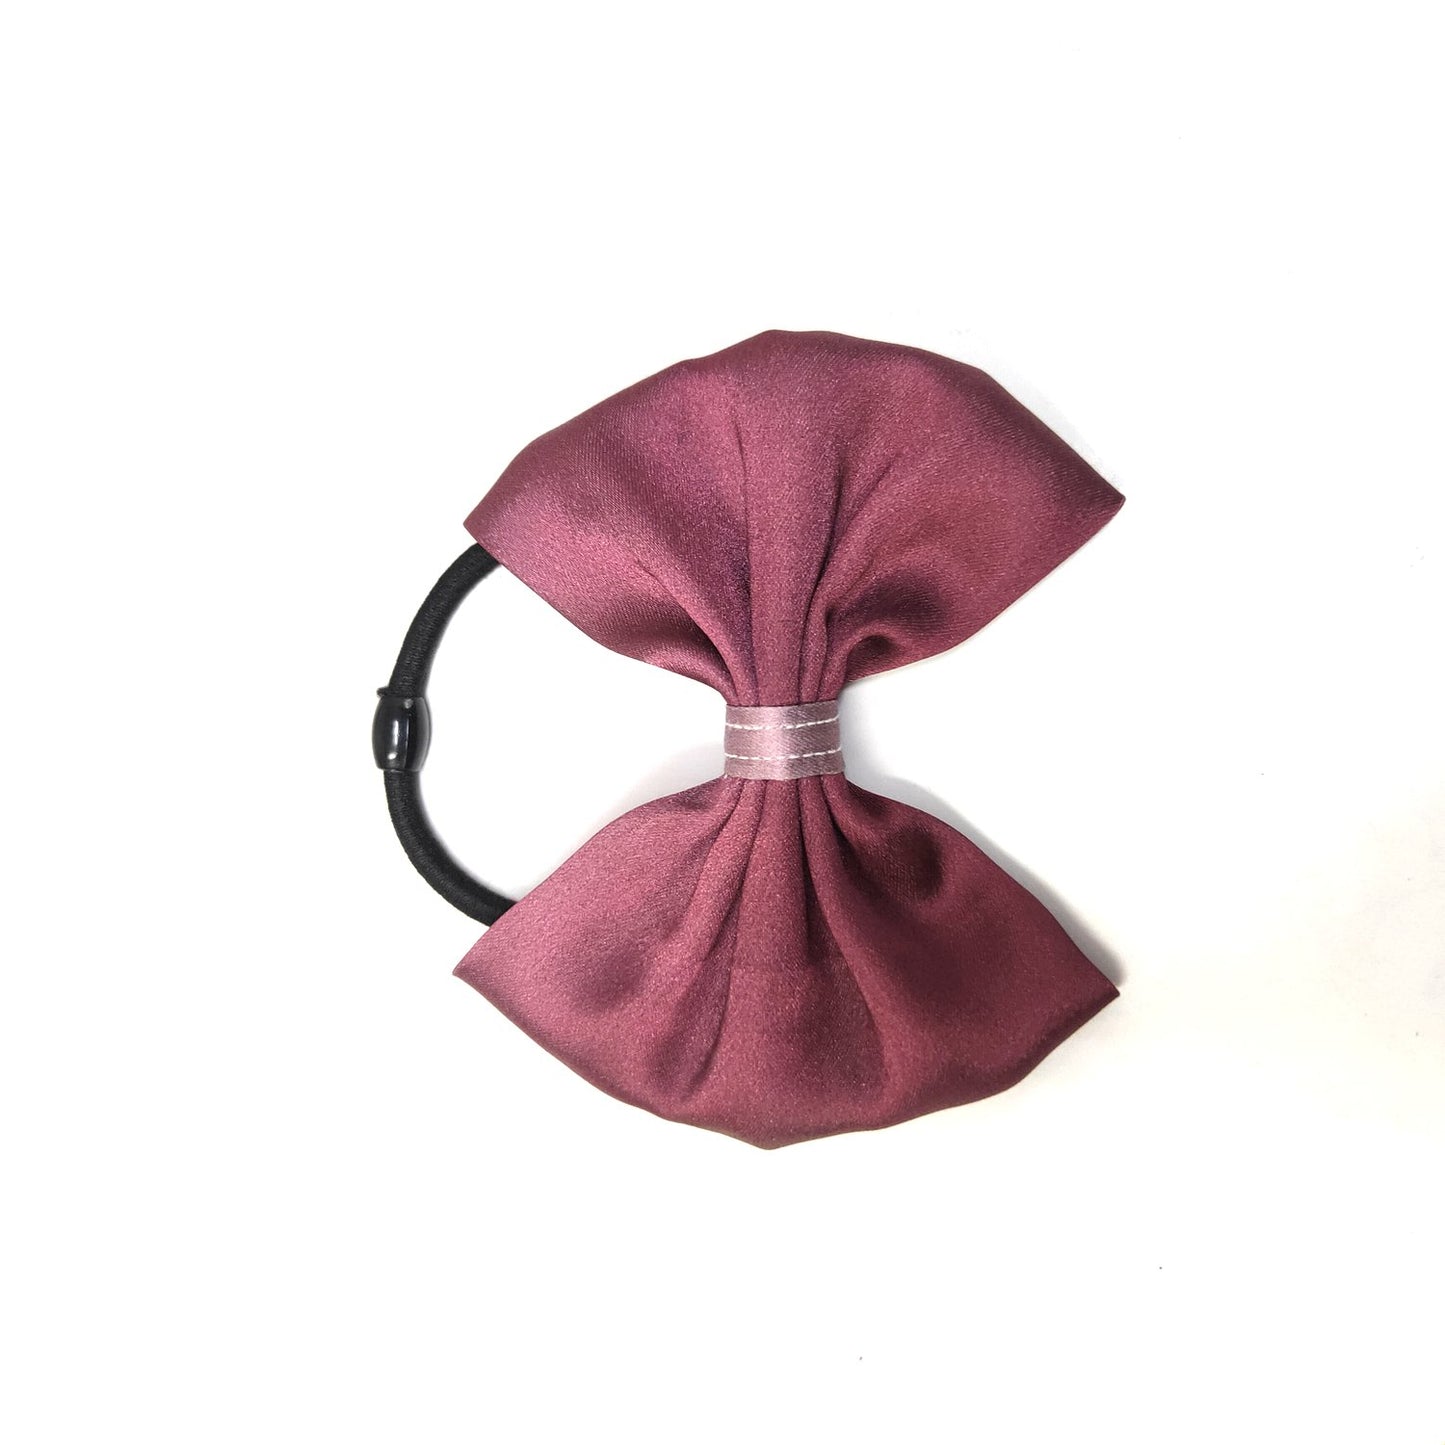 Combo of 2 Satin Bow Hair Tie - (35-08)